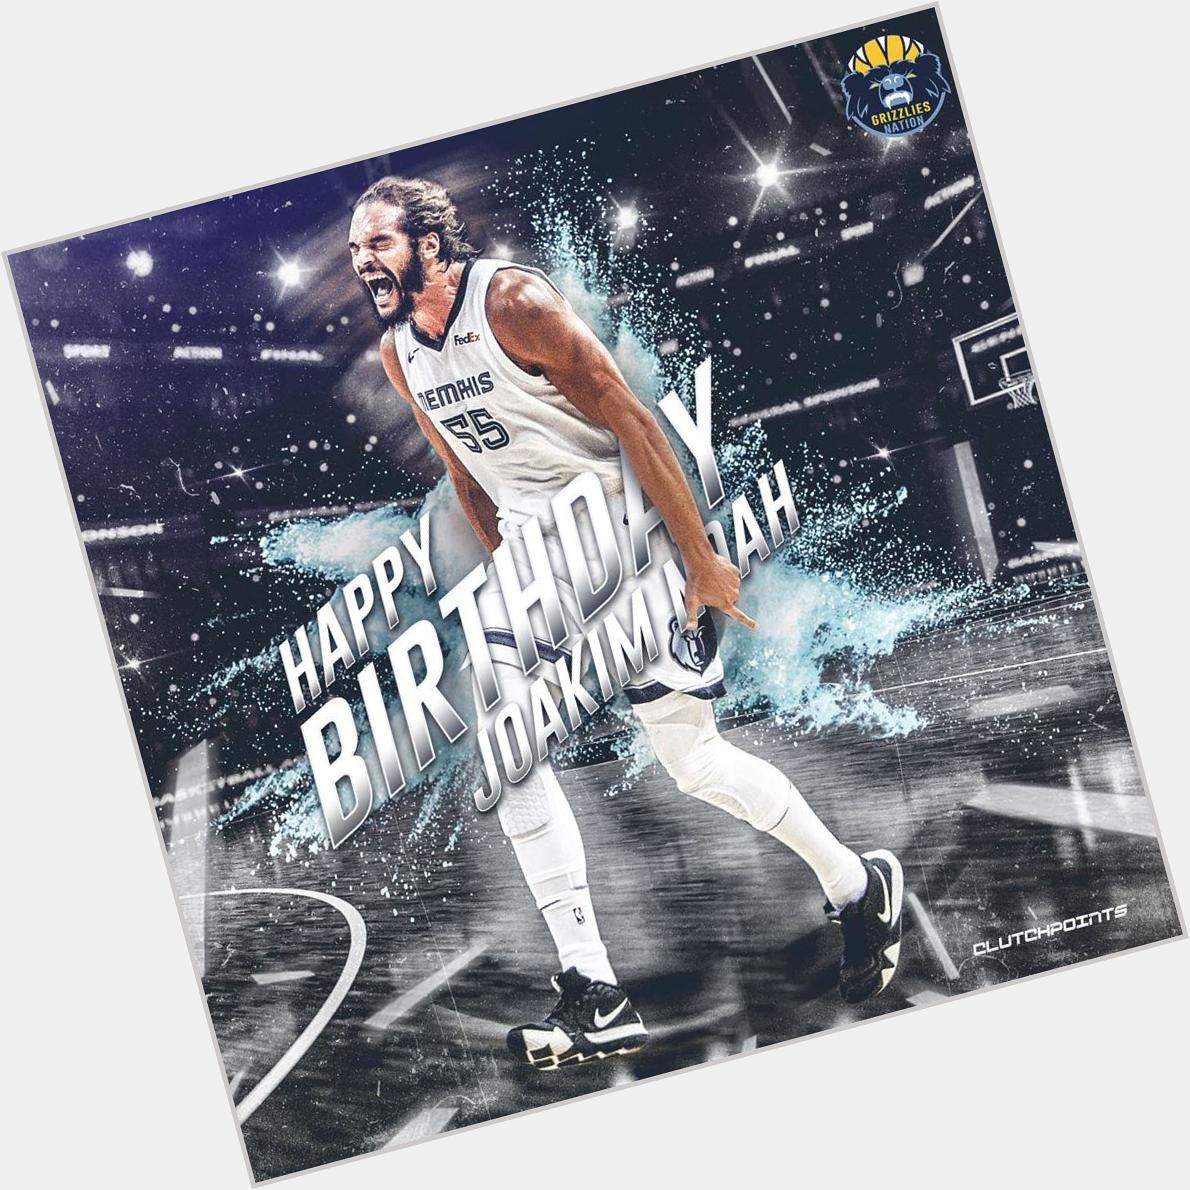 Join Grizzlies Nation in wishing Joakim Noah a happy 34th birthday!    